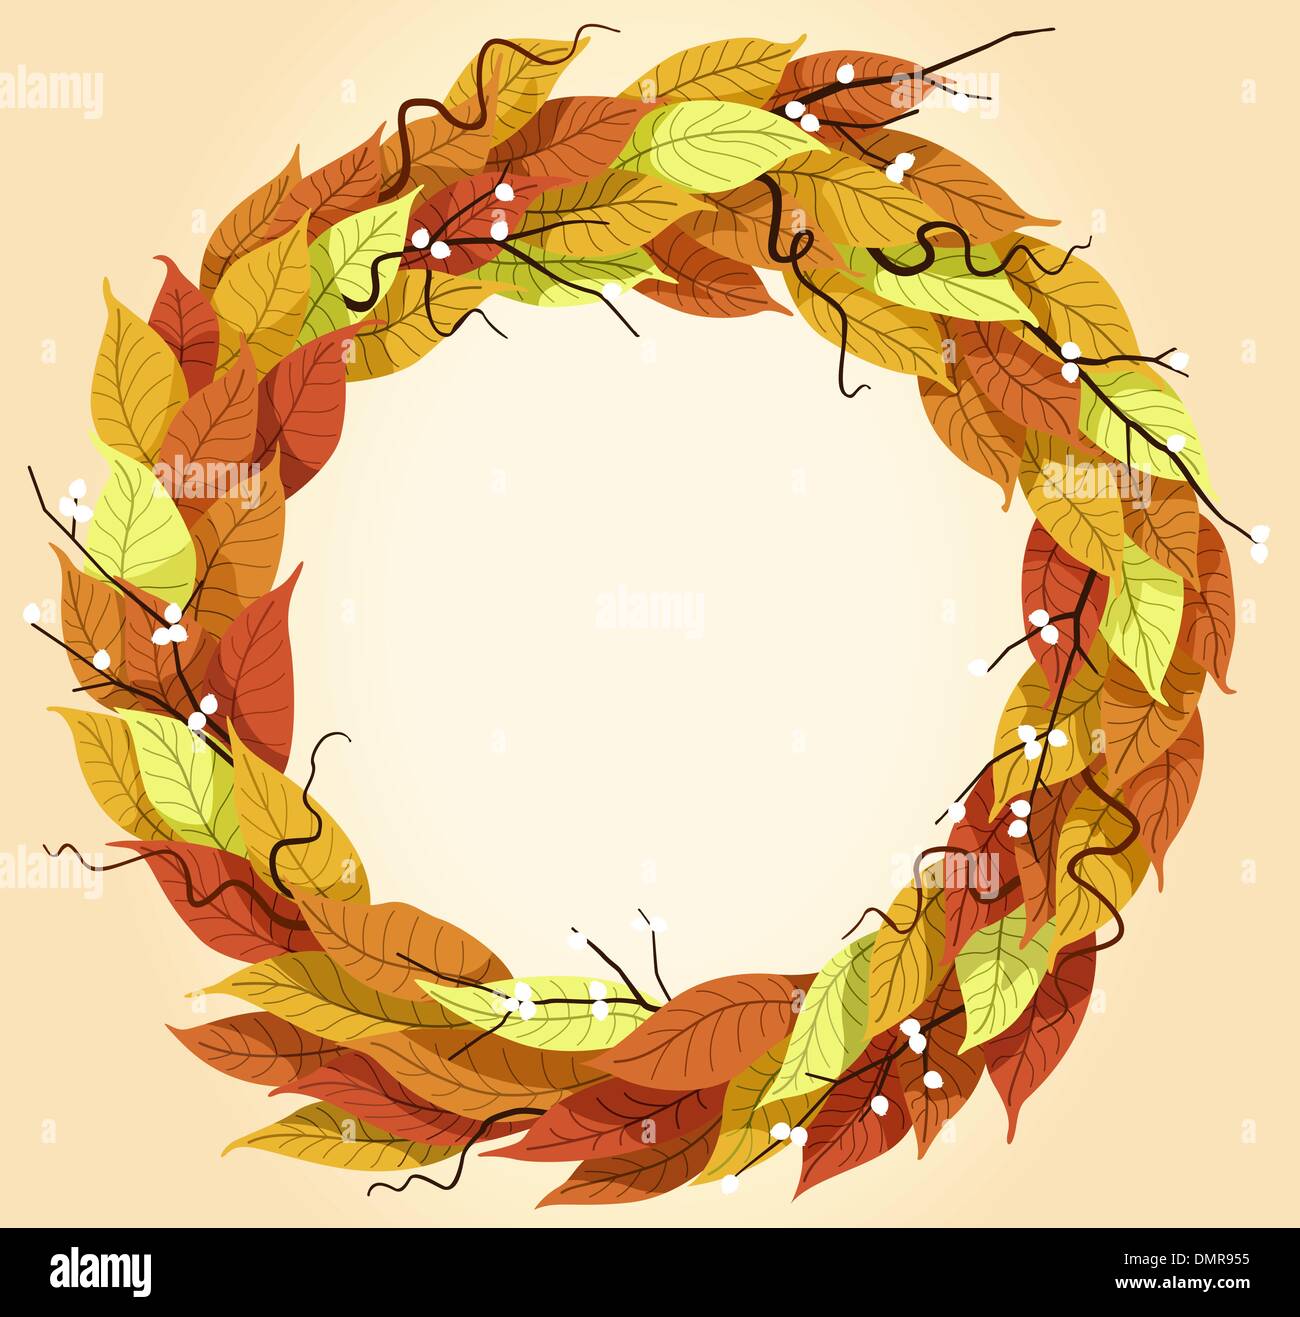 Autumn leaves form in round shape Stock Vector